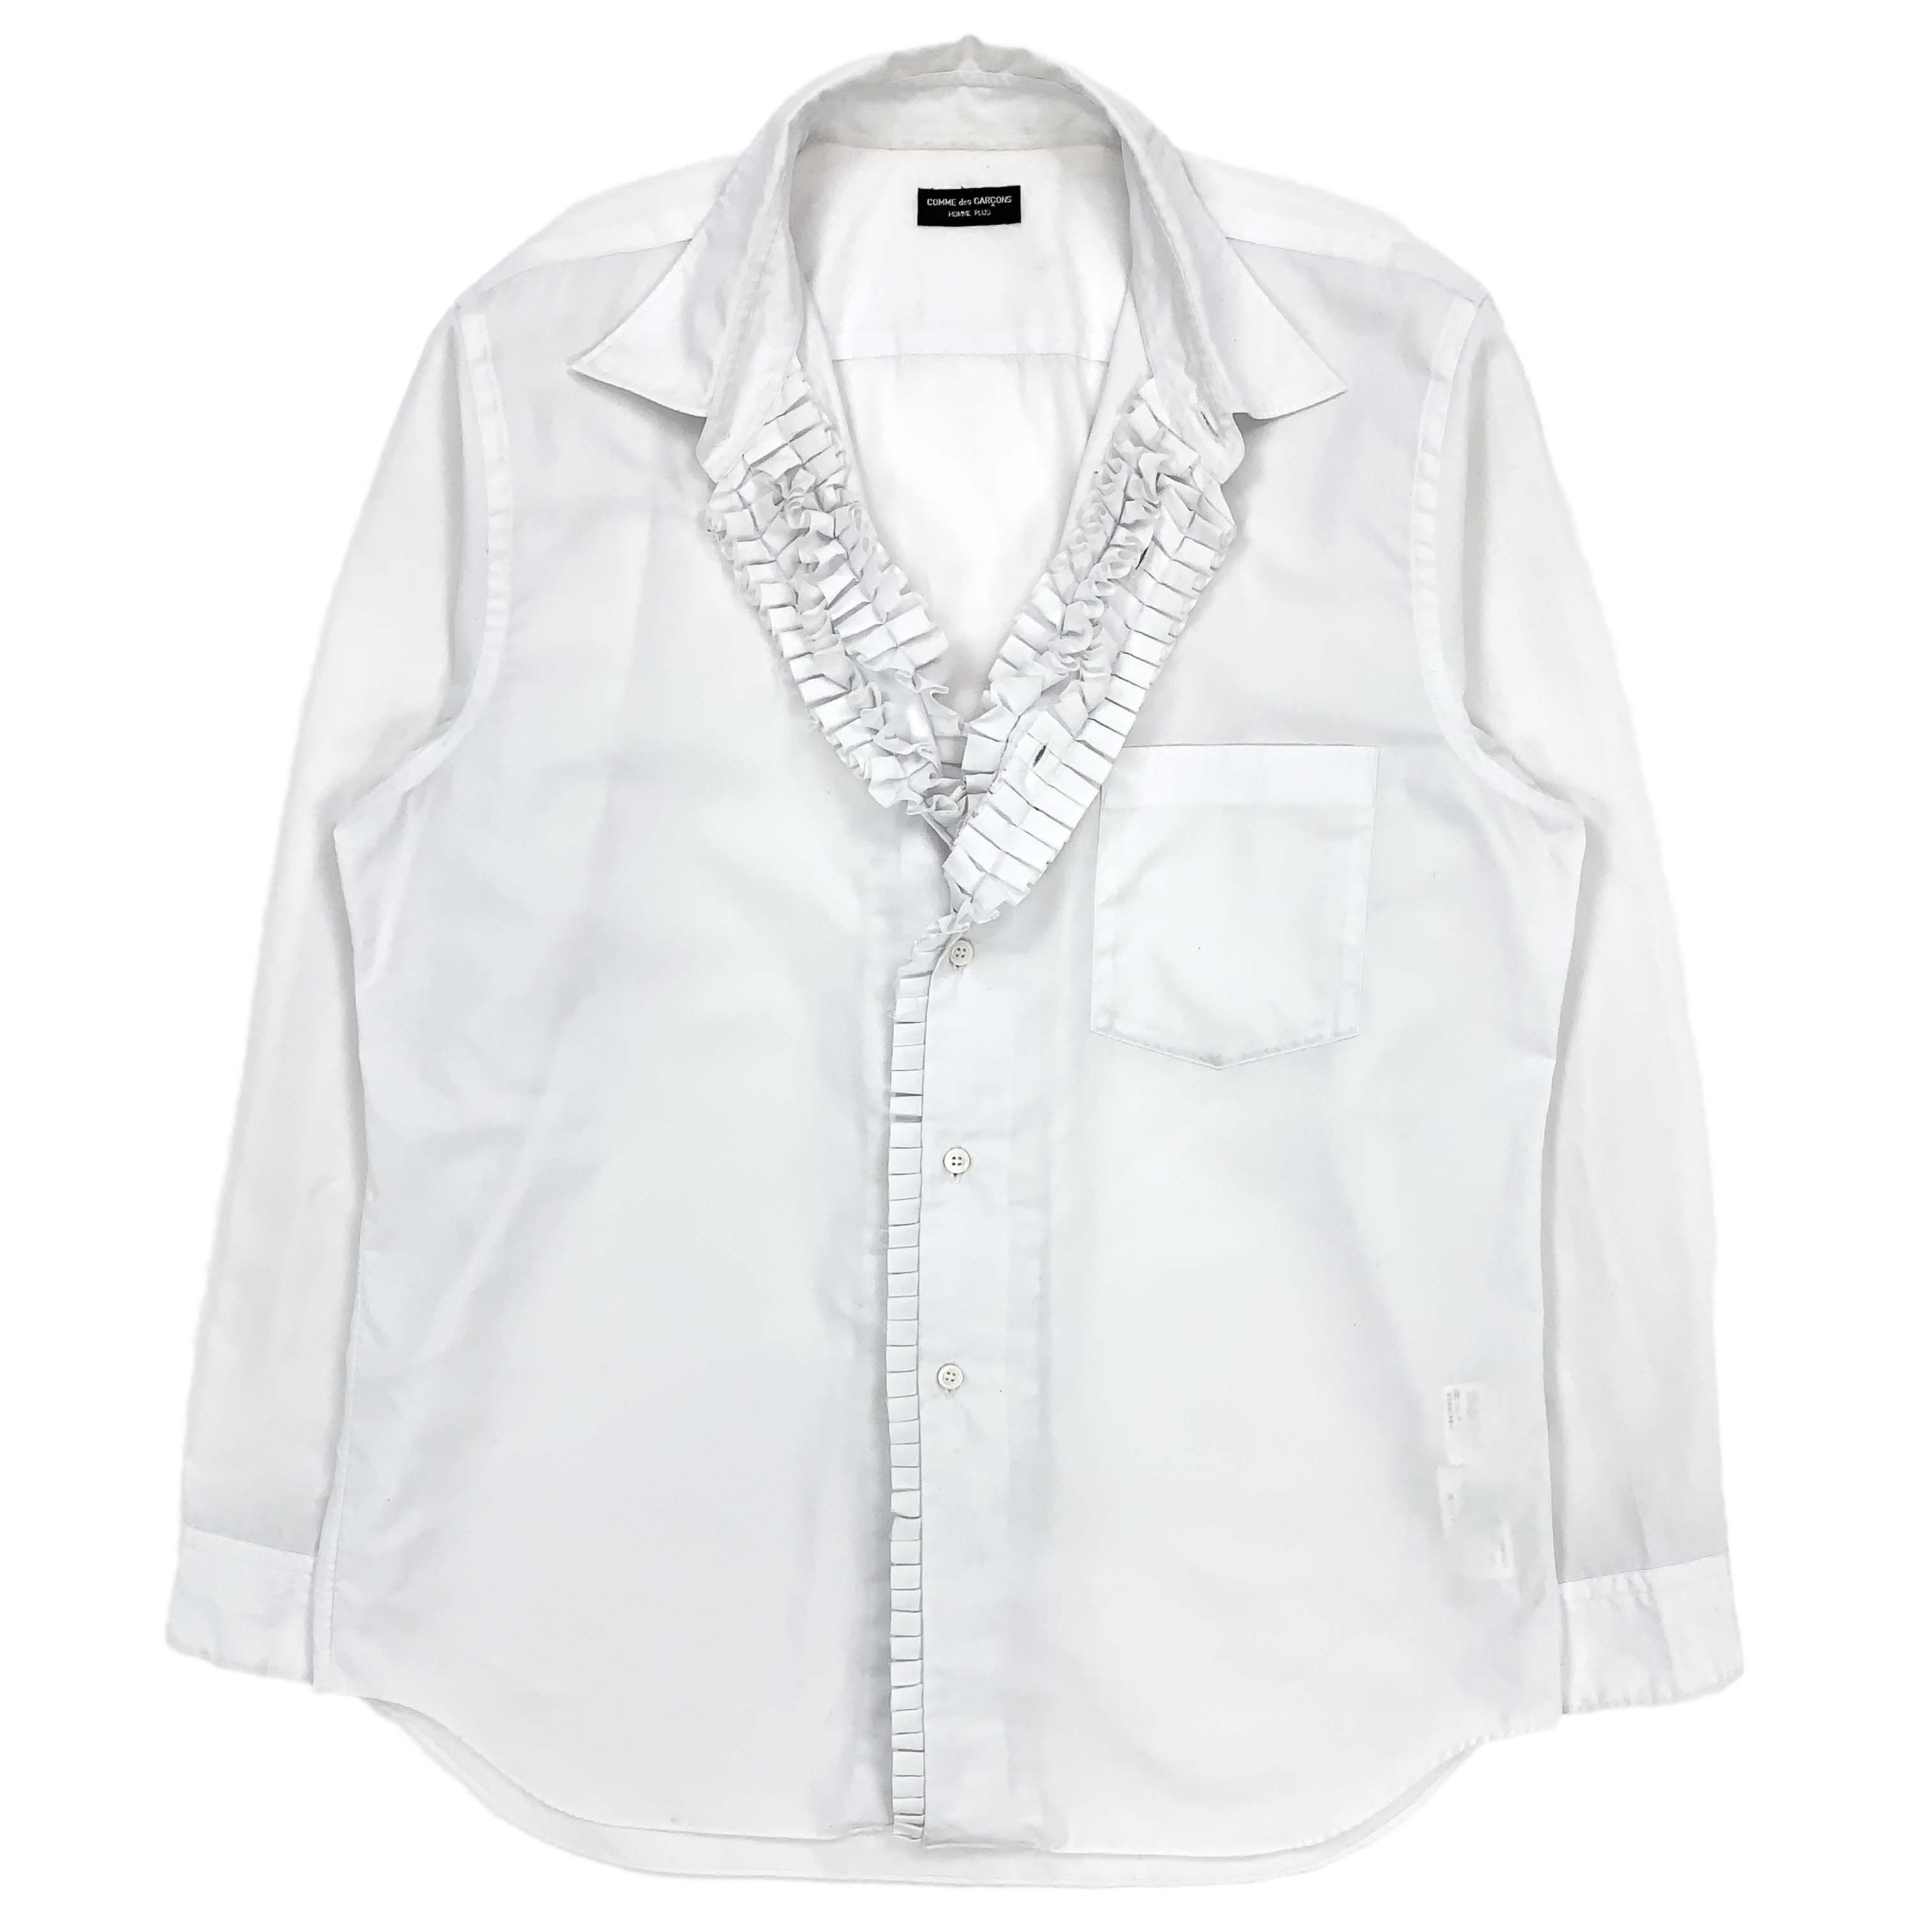 SS99 Concealed Polyester-Cotton Ruffle Shirt - 1